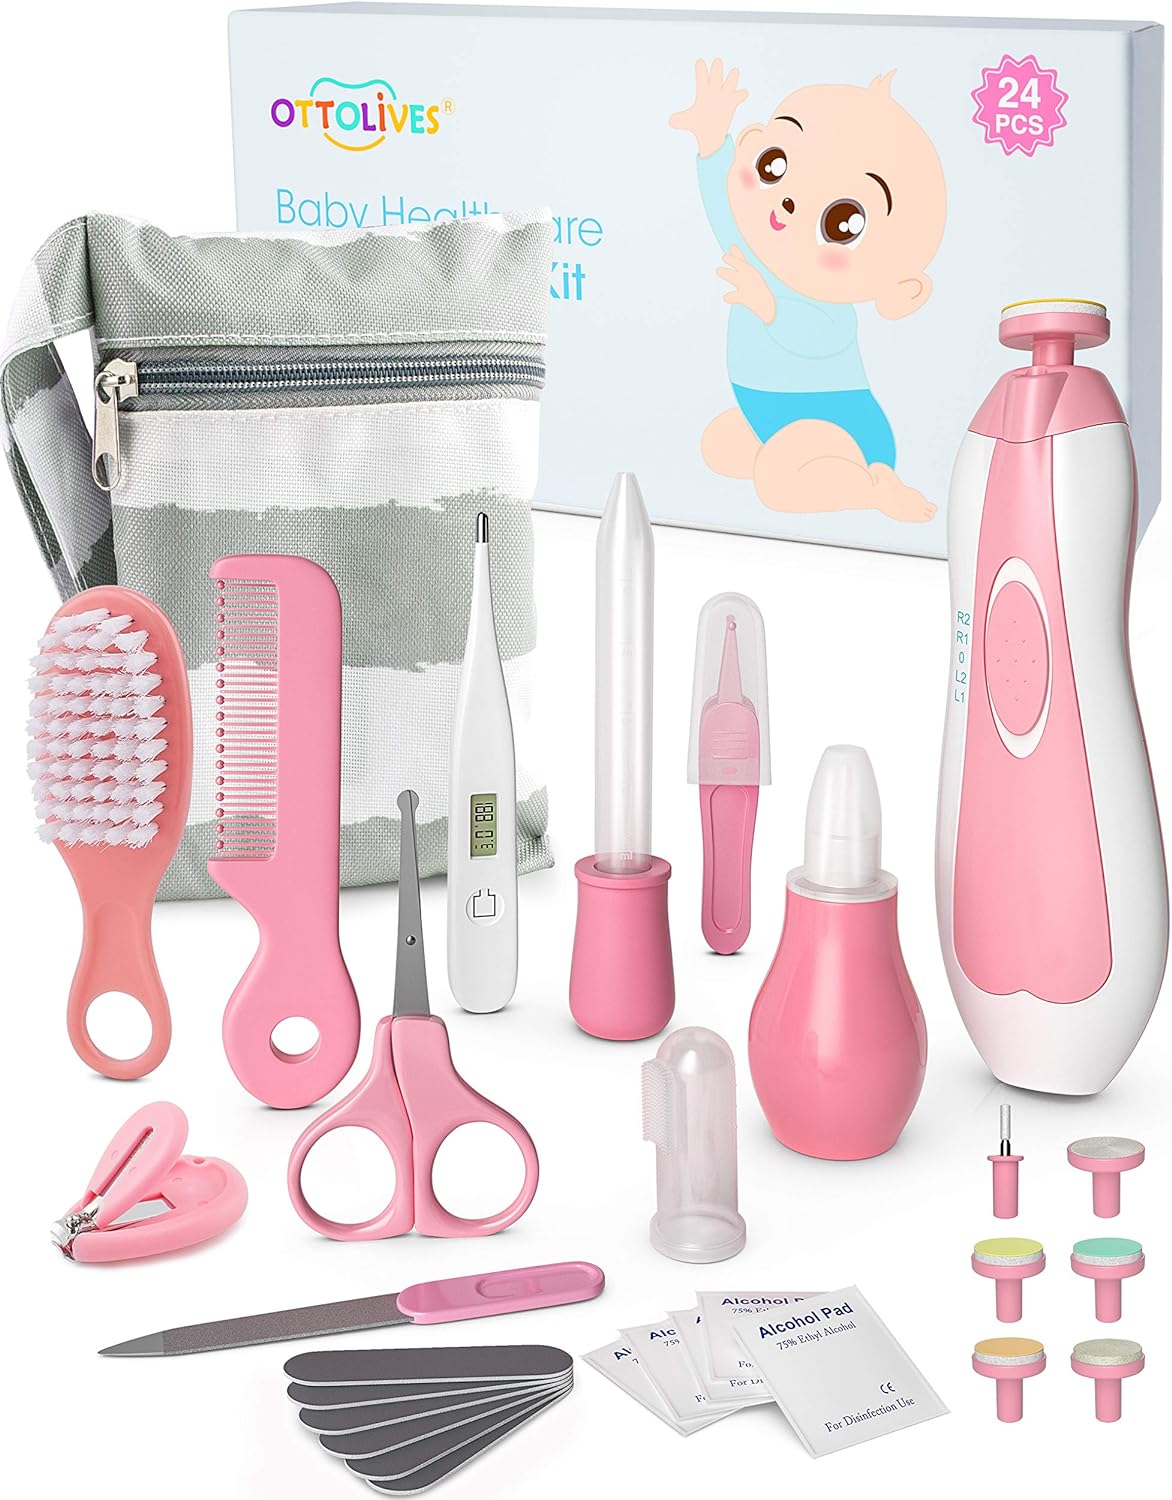 OTTOLIVES Baby Healthcare and Grooming Kit, Baby Electric Nail Trimmer Set Newborn Nursery Health Care Set for Newborn Infant Toddlers Baby Boys Girls Kids (Pink)